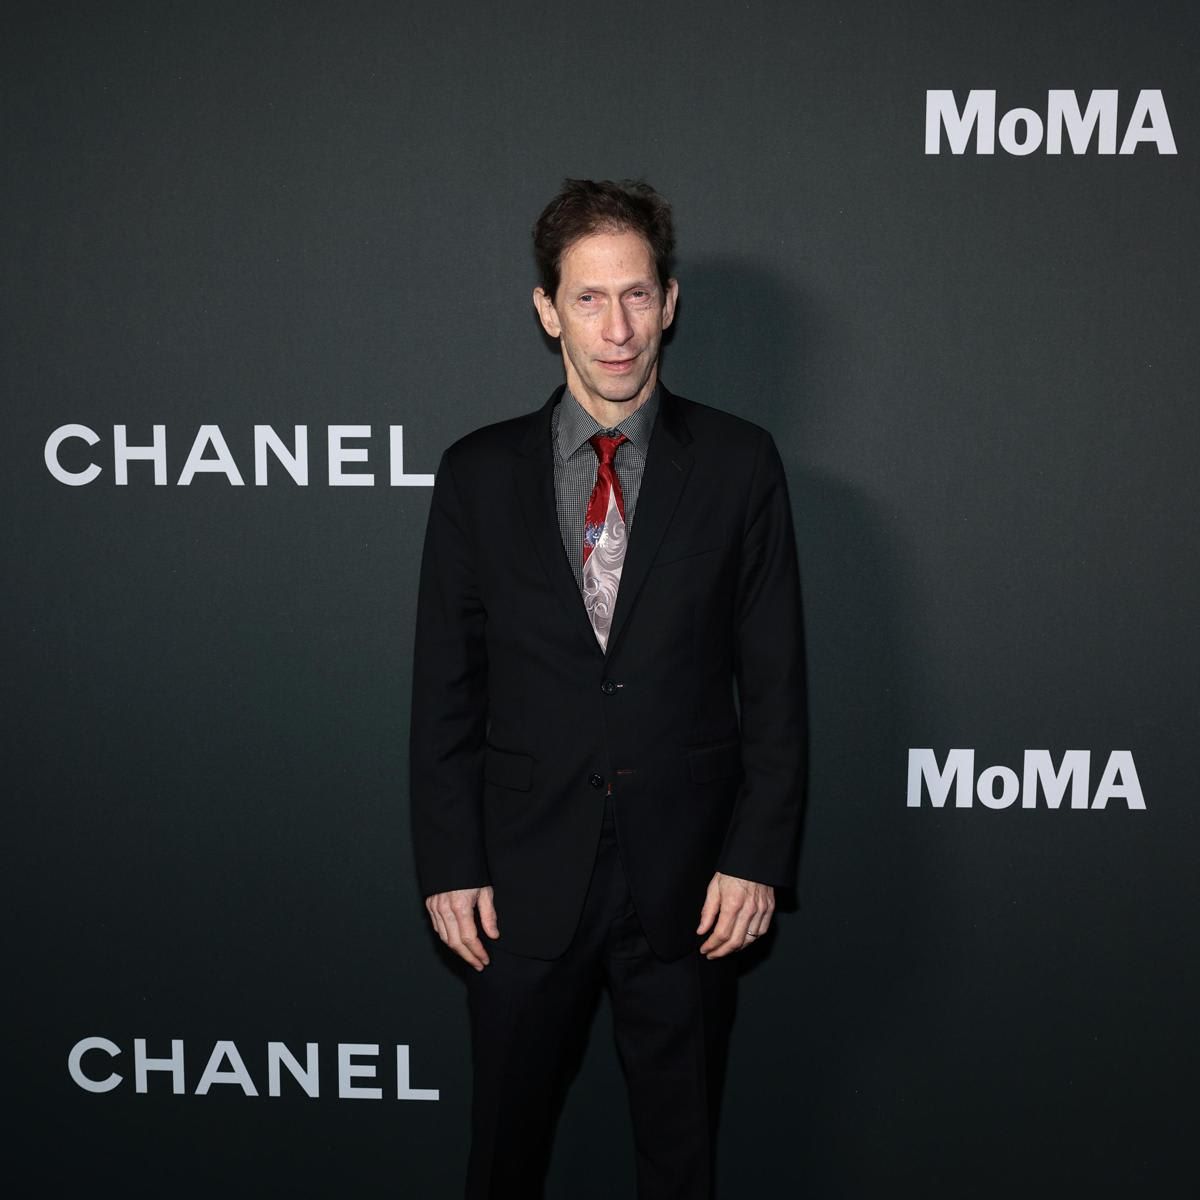 The Museum Of Modern Art Film Benefit Presented By CHANEL